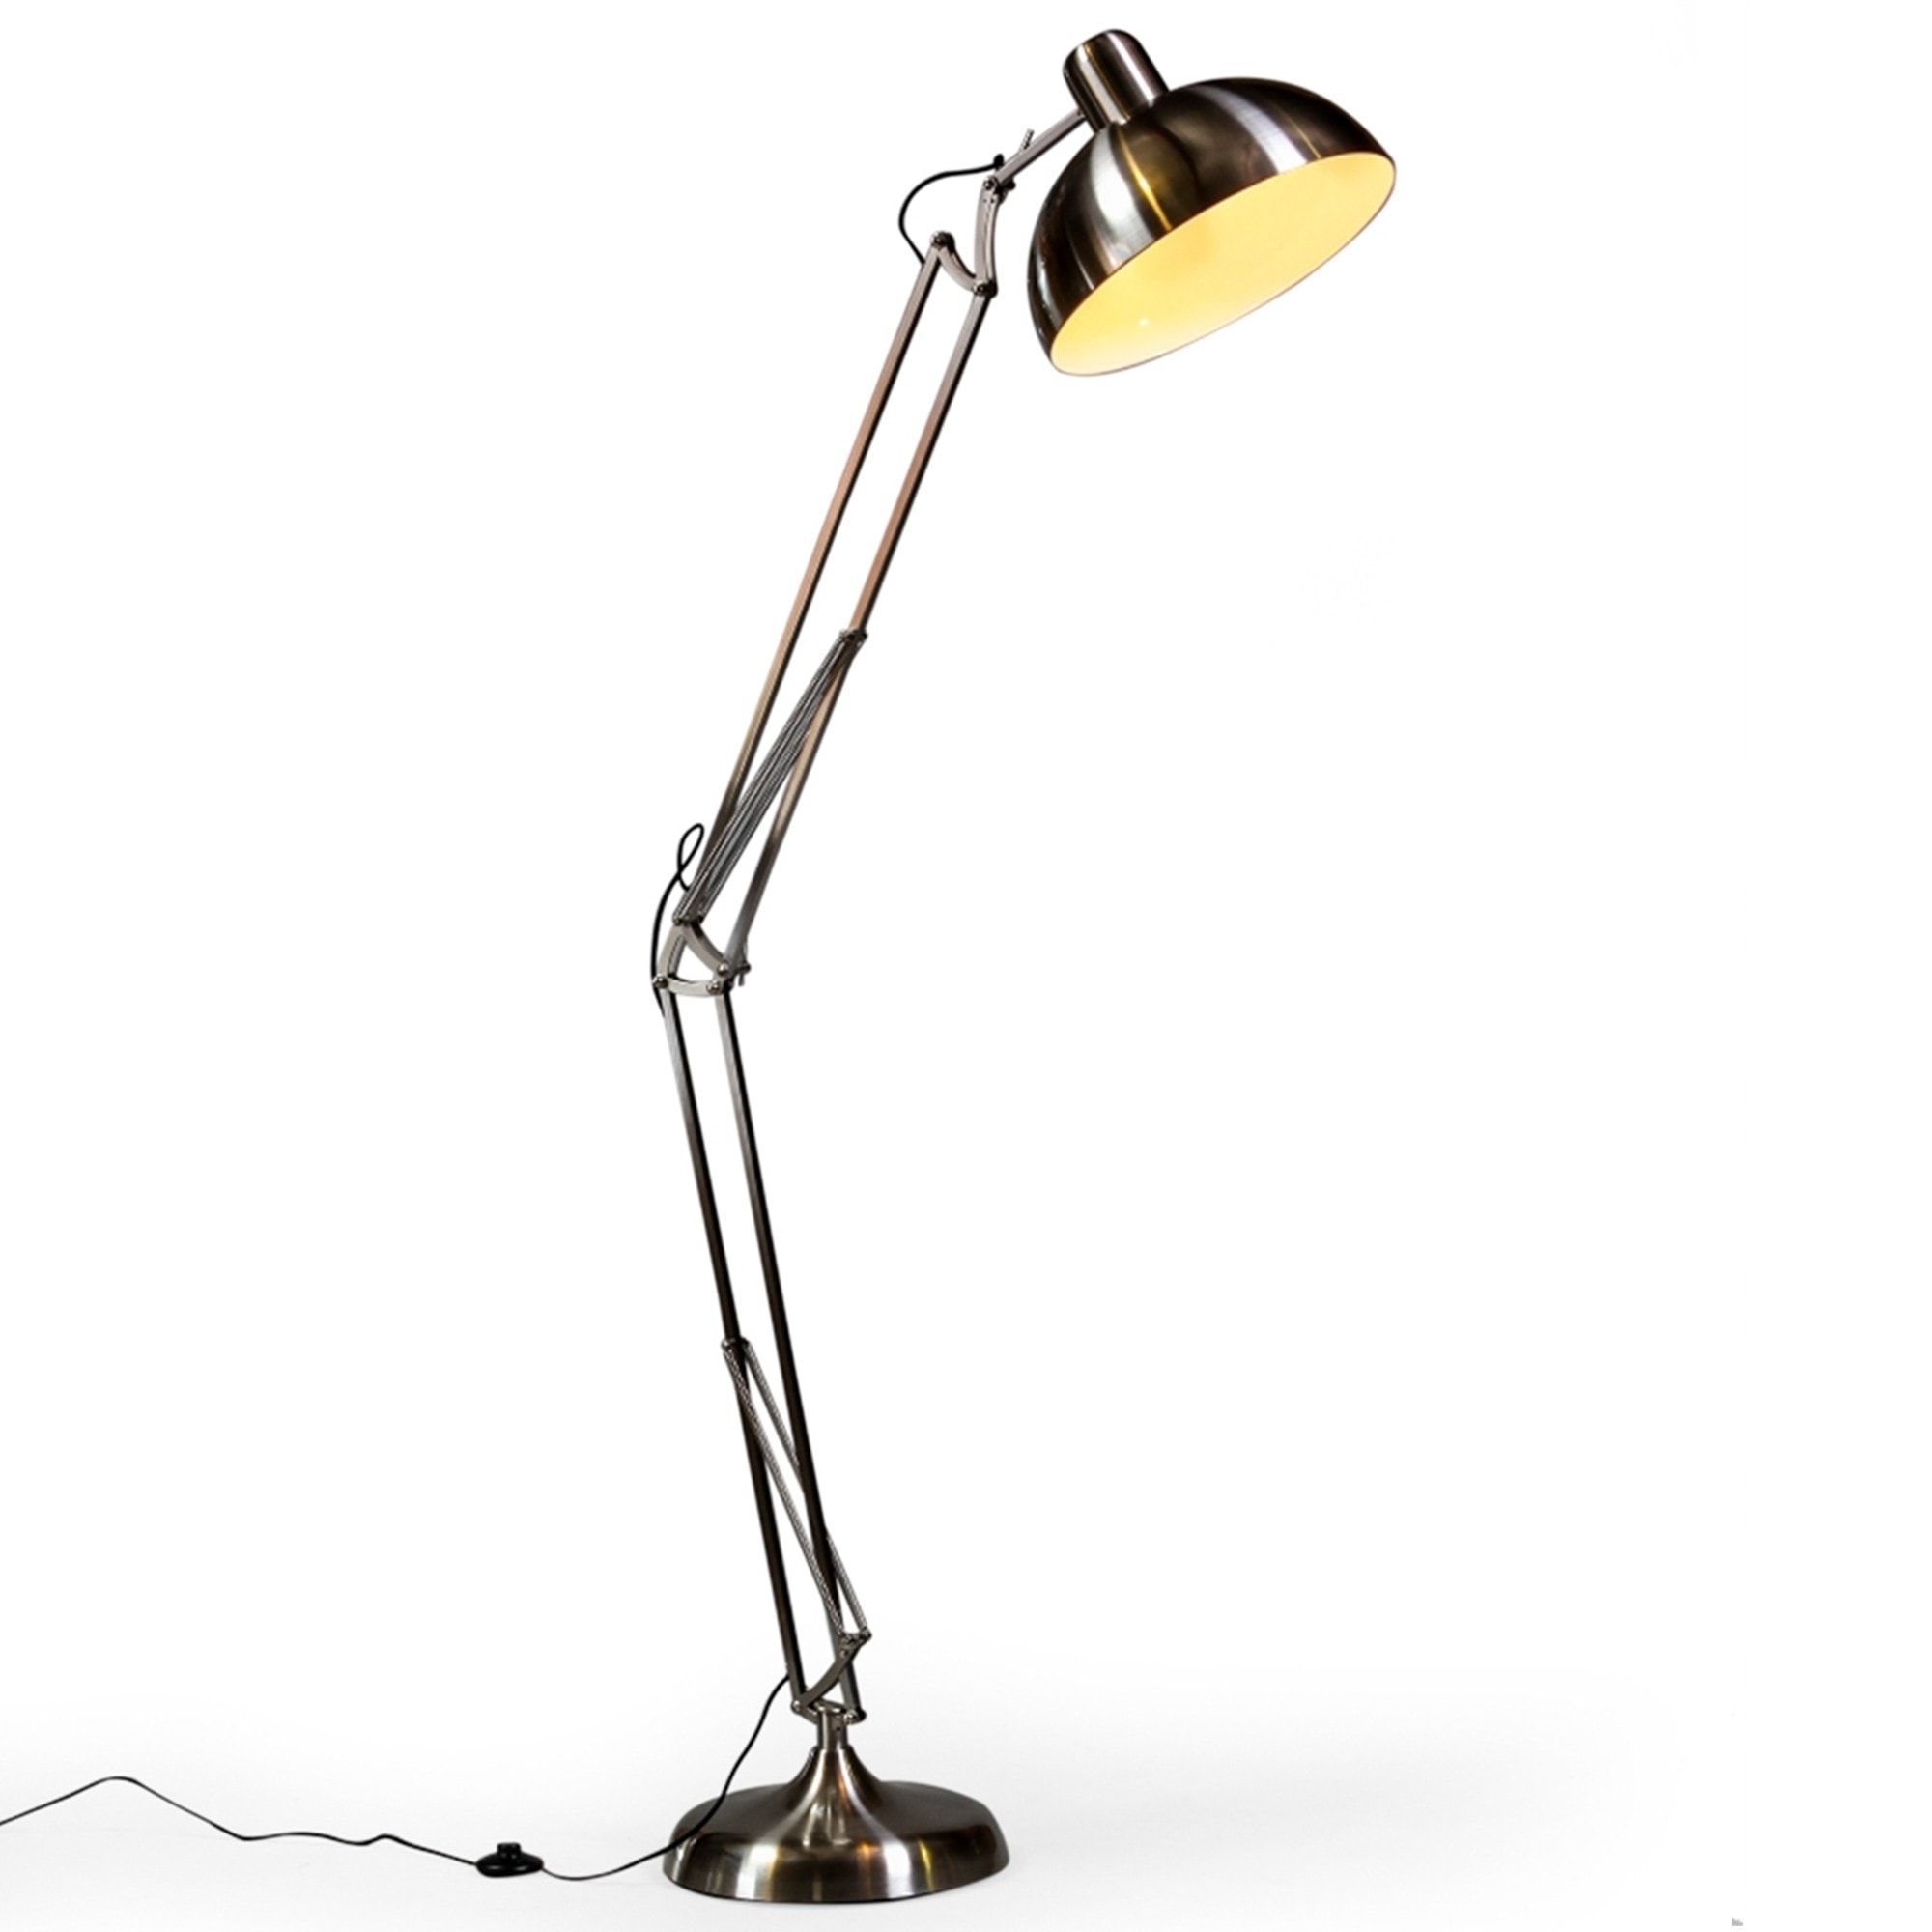 Brushed Steel Extra Large Classic Desk Style Floor Lamp | Floor Lamps Within Metal Brushed Floor Lamps (View 18 of 20)